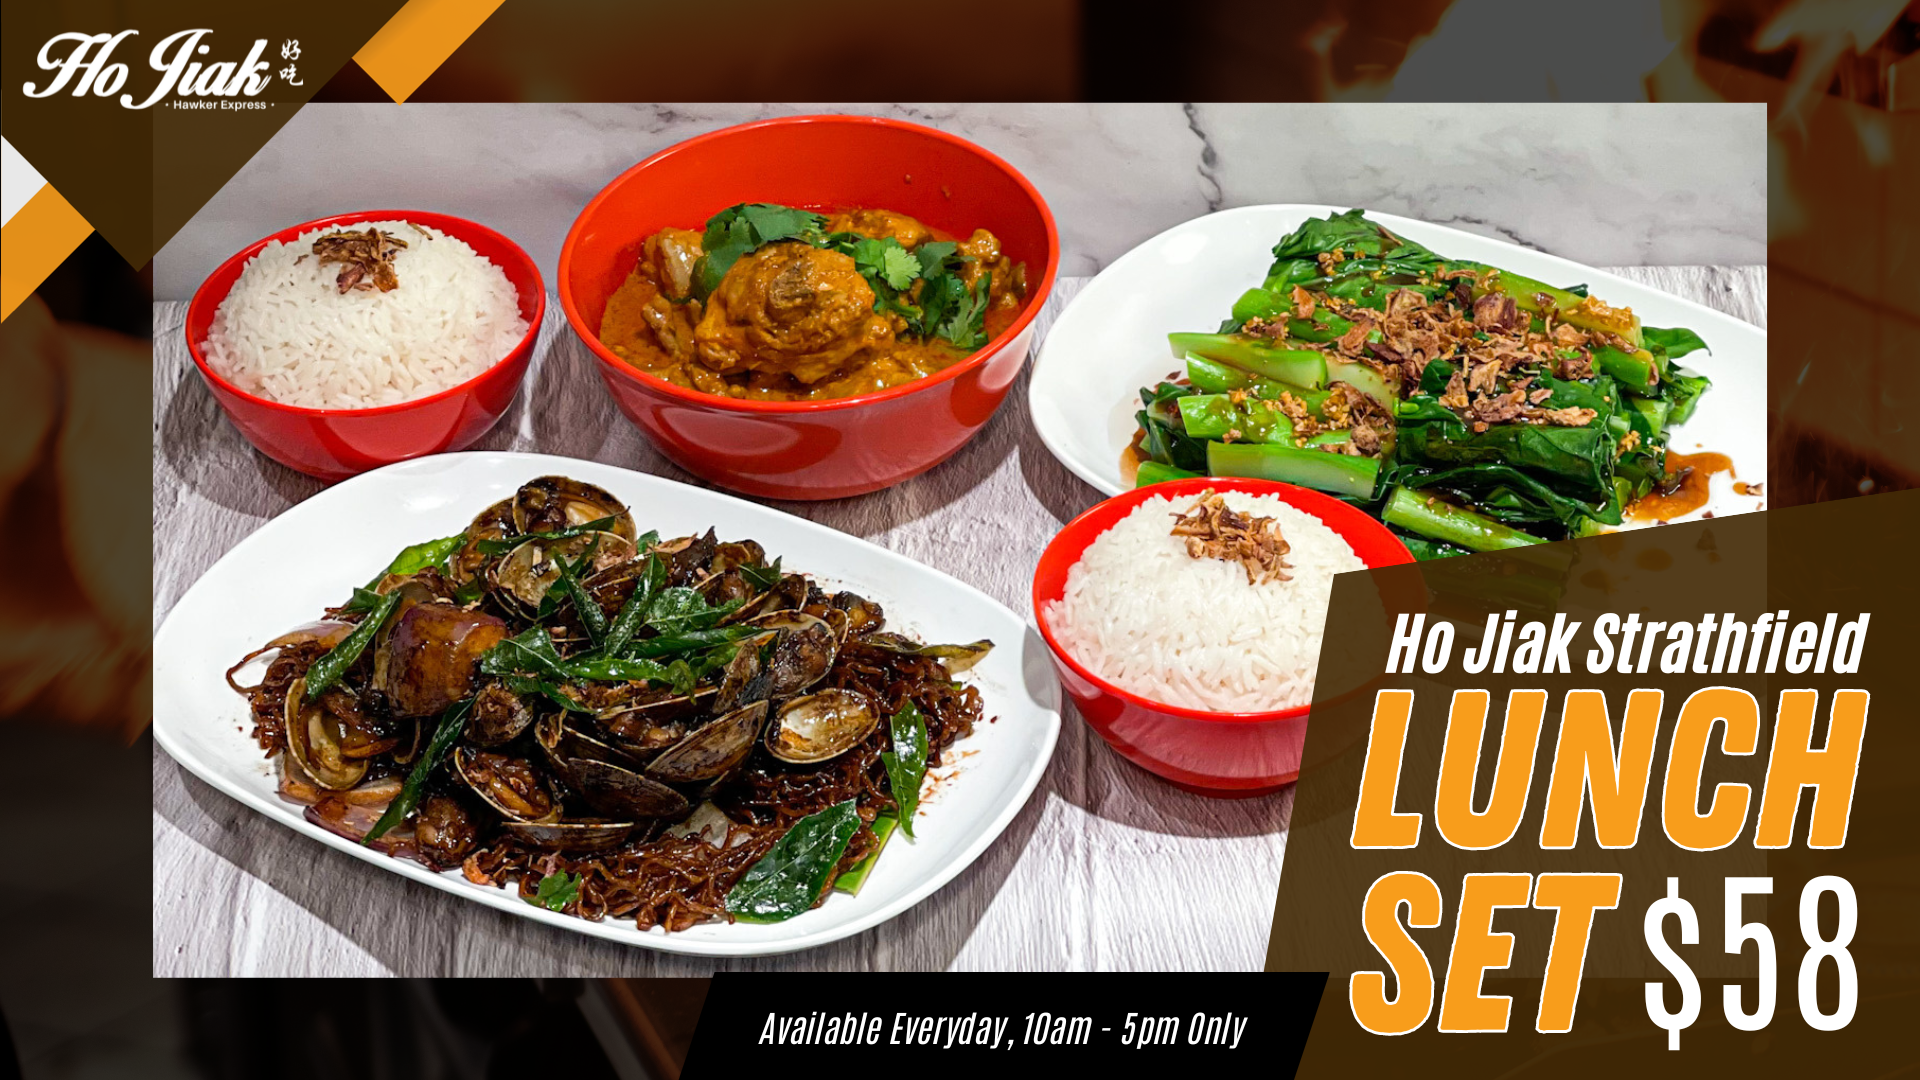 Introducing our $58 Value Lunch Set, a feast for all:  Sarawak Black Pepper Pipis + Noodles, Chinese Broccoli, Curry Chicken and 2 steamed rice servings